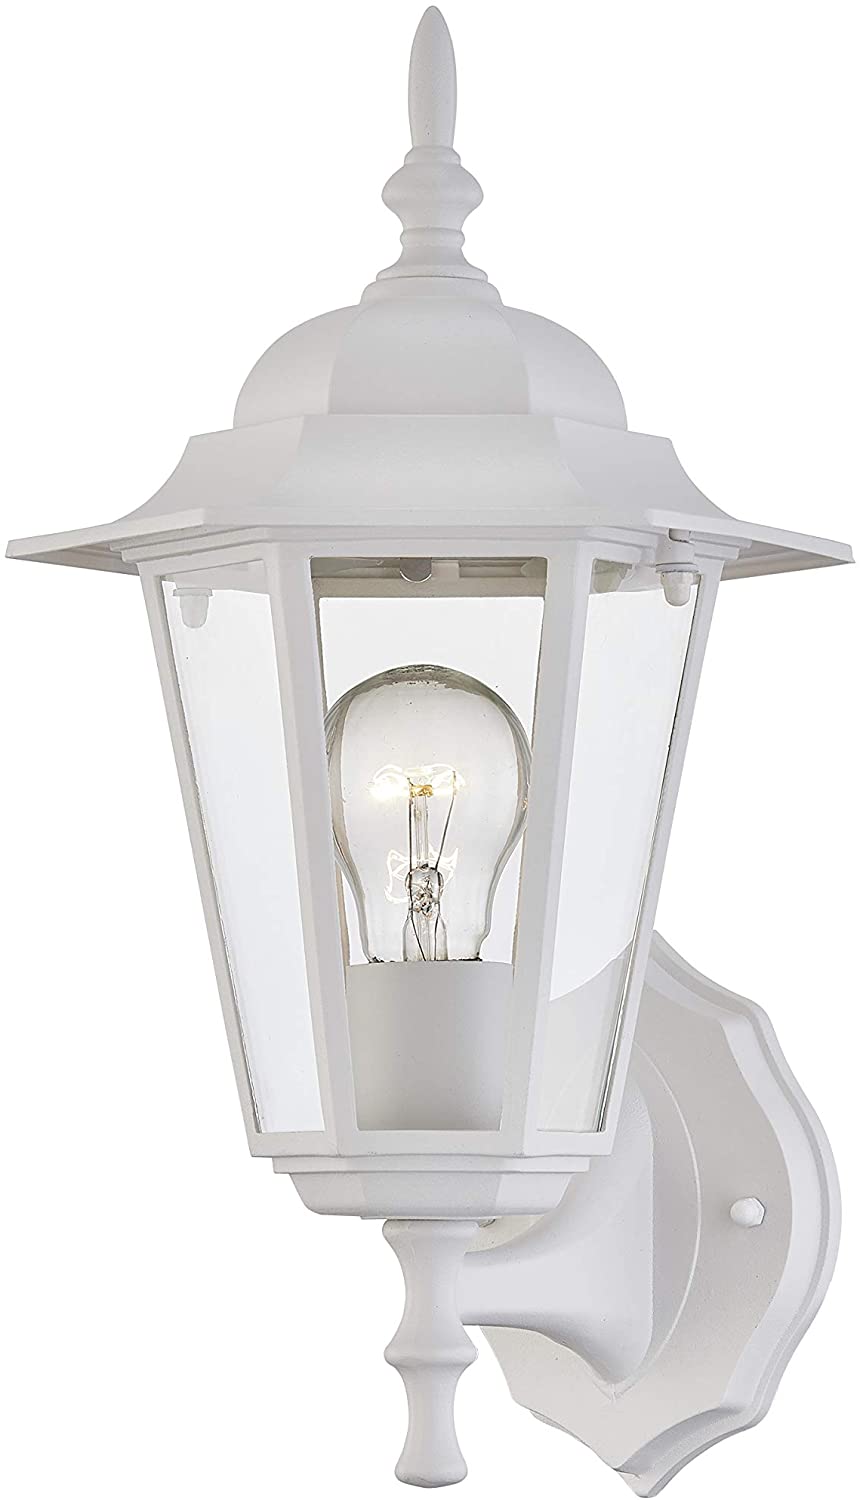 Gruenlich Outdoor Wall Lantern, Wall Sconce as Porch Lighting Fixture with One E26 Base Max 100W, Aluminum Housing Plus Glass, ETL Rated, Bulb Not Included (White Finish)